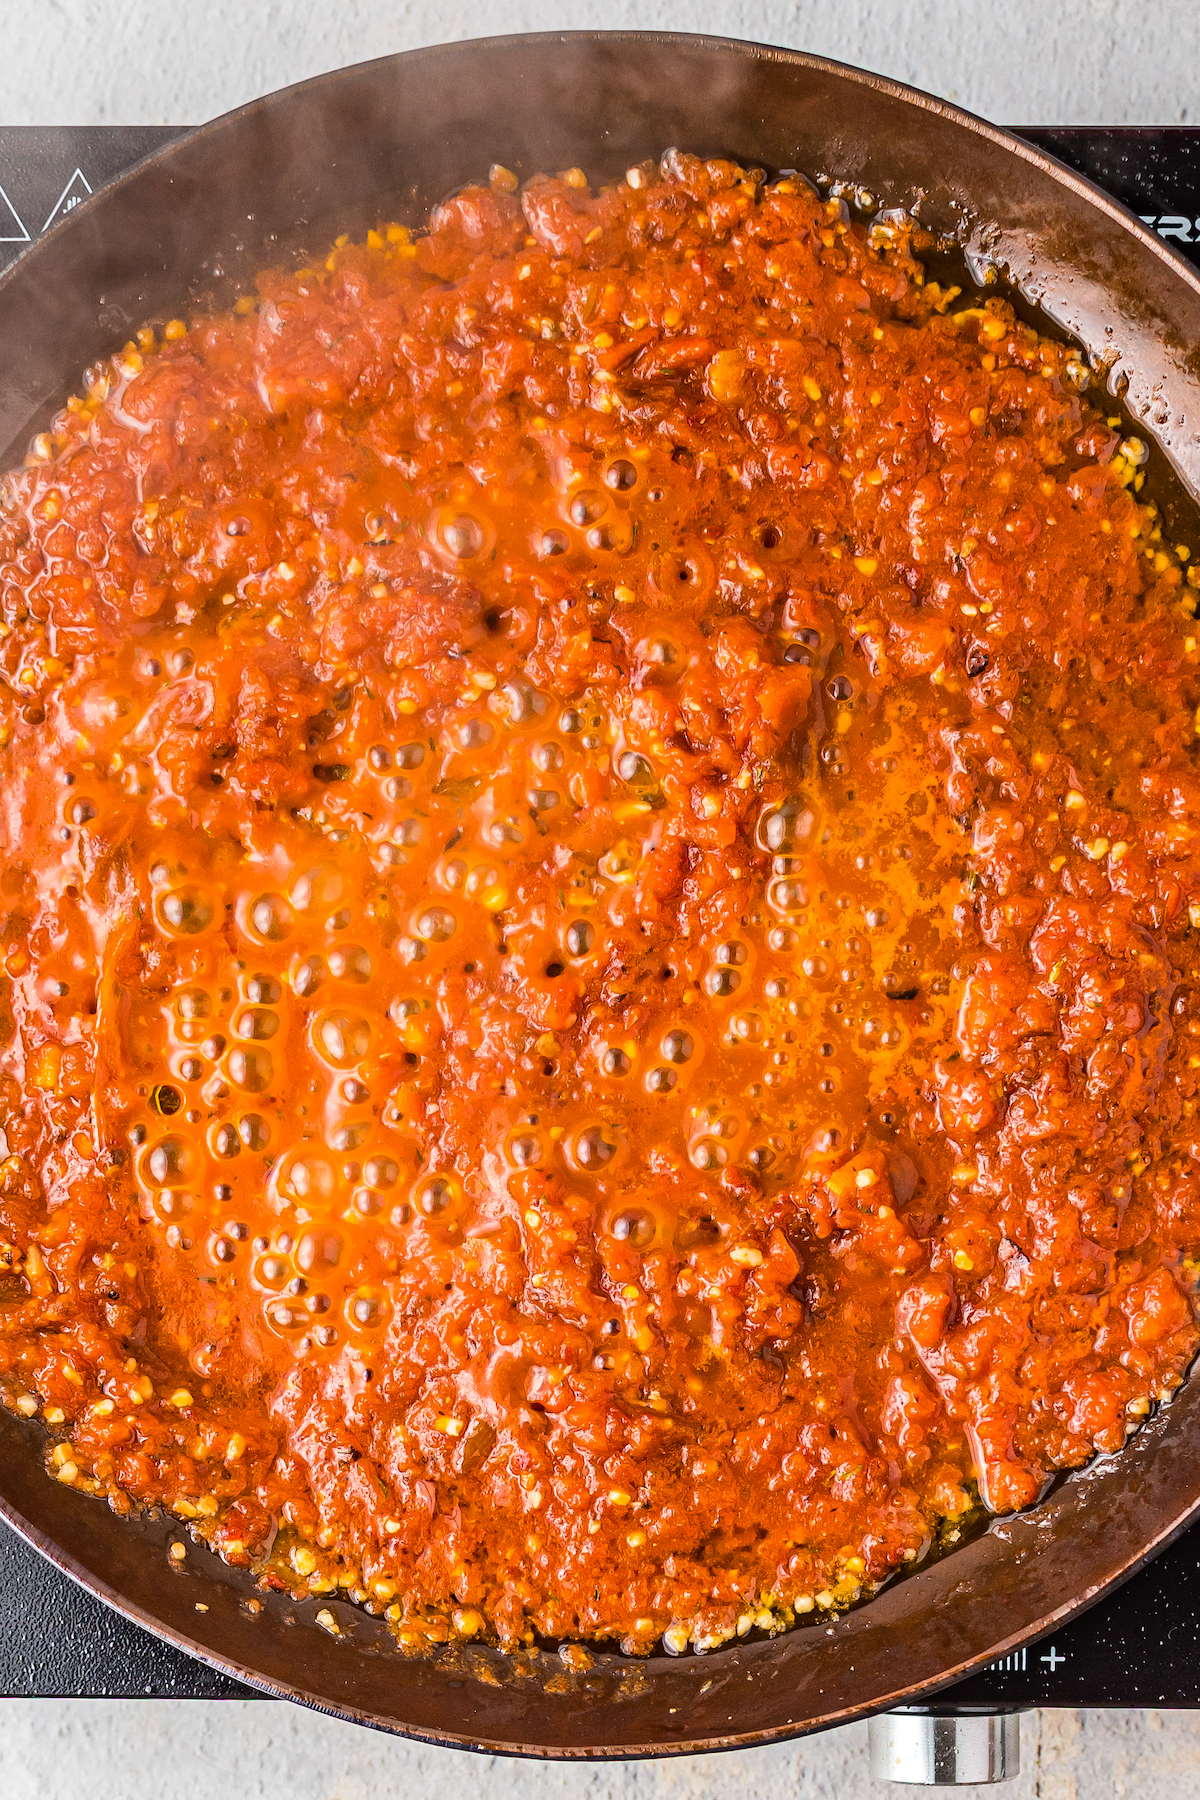 Chile sauce simmering in a skillet.